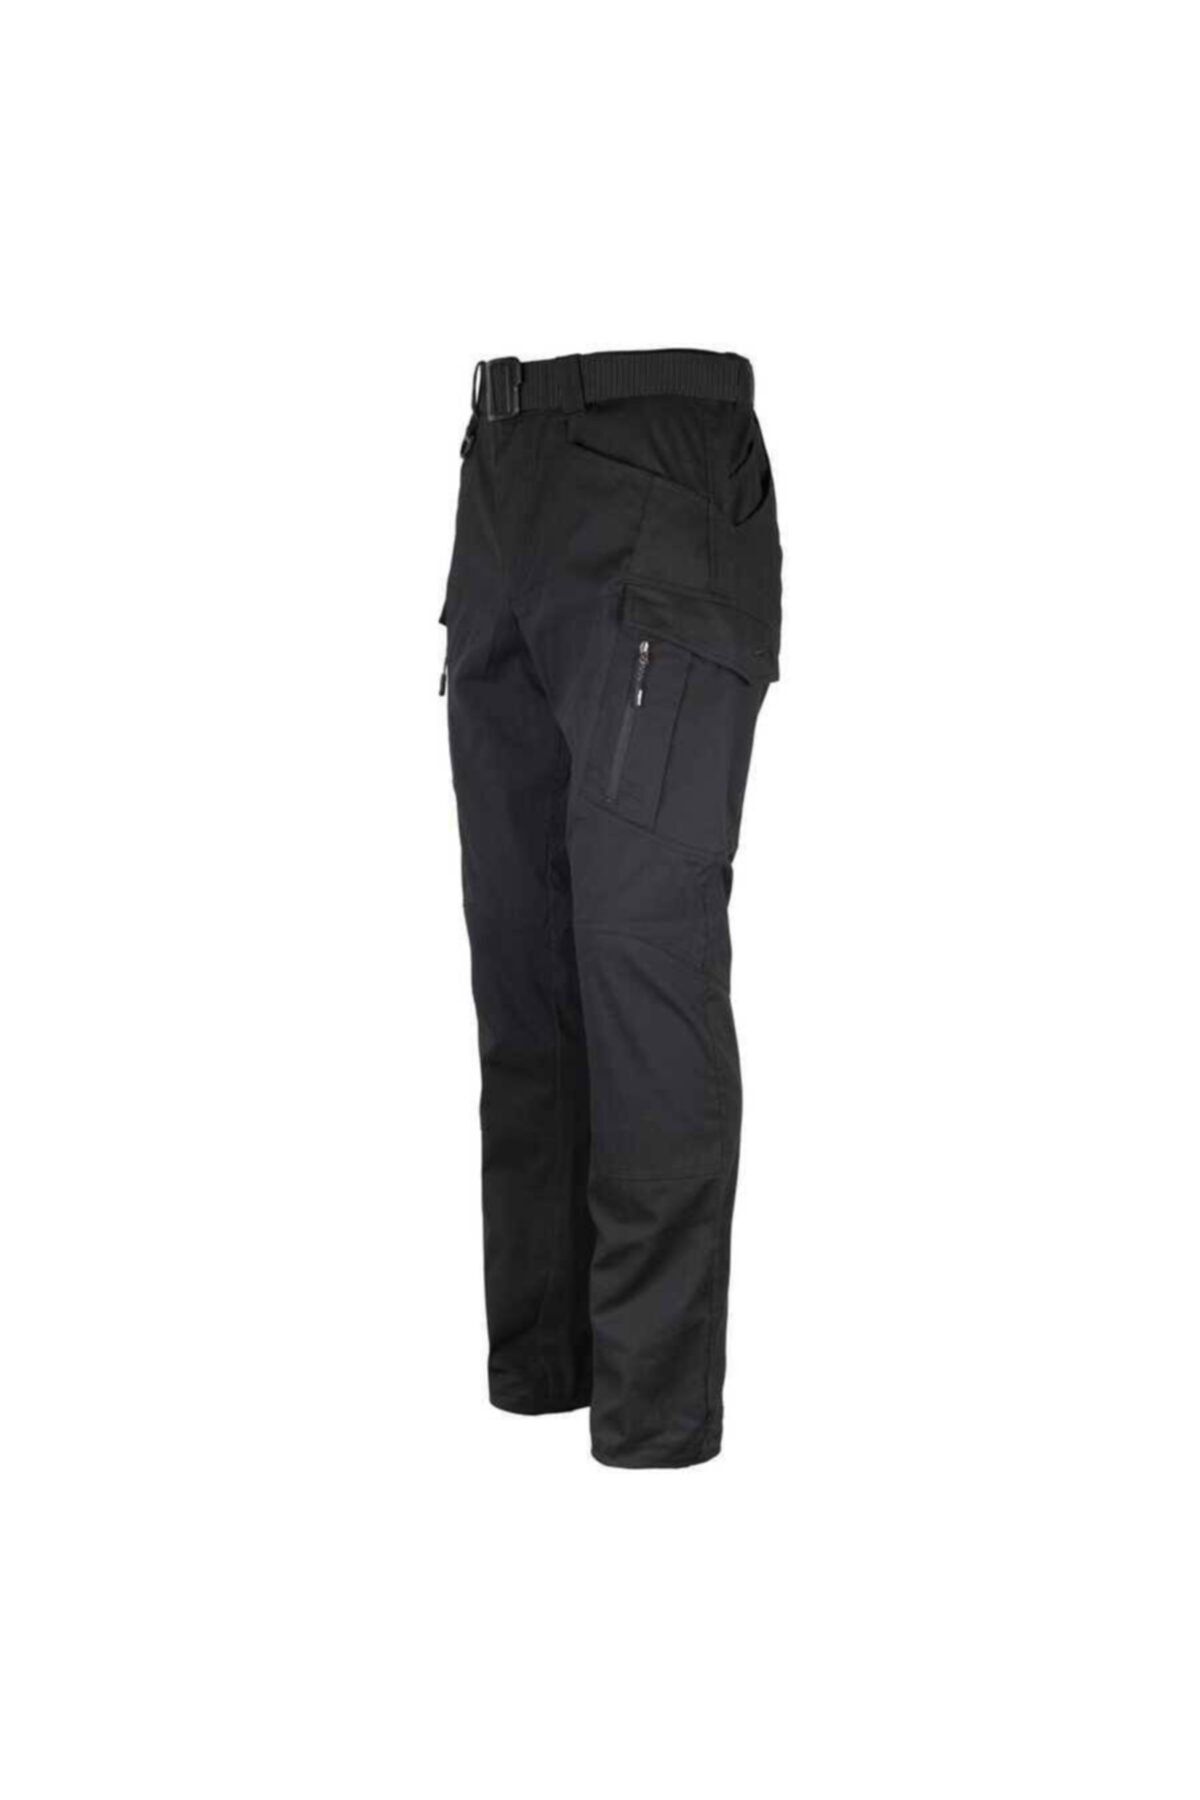 Tact Squad T7512 Men's & Women's Lightweight Tactical Trousers – Tactsquad